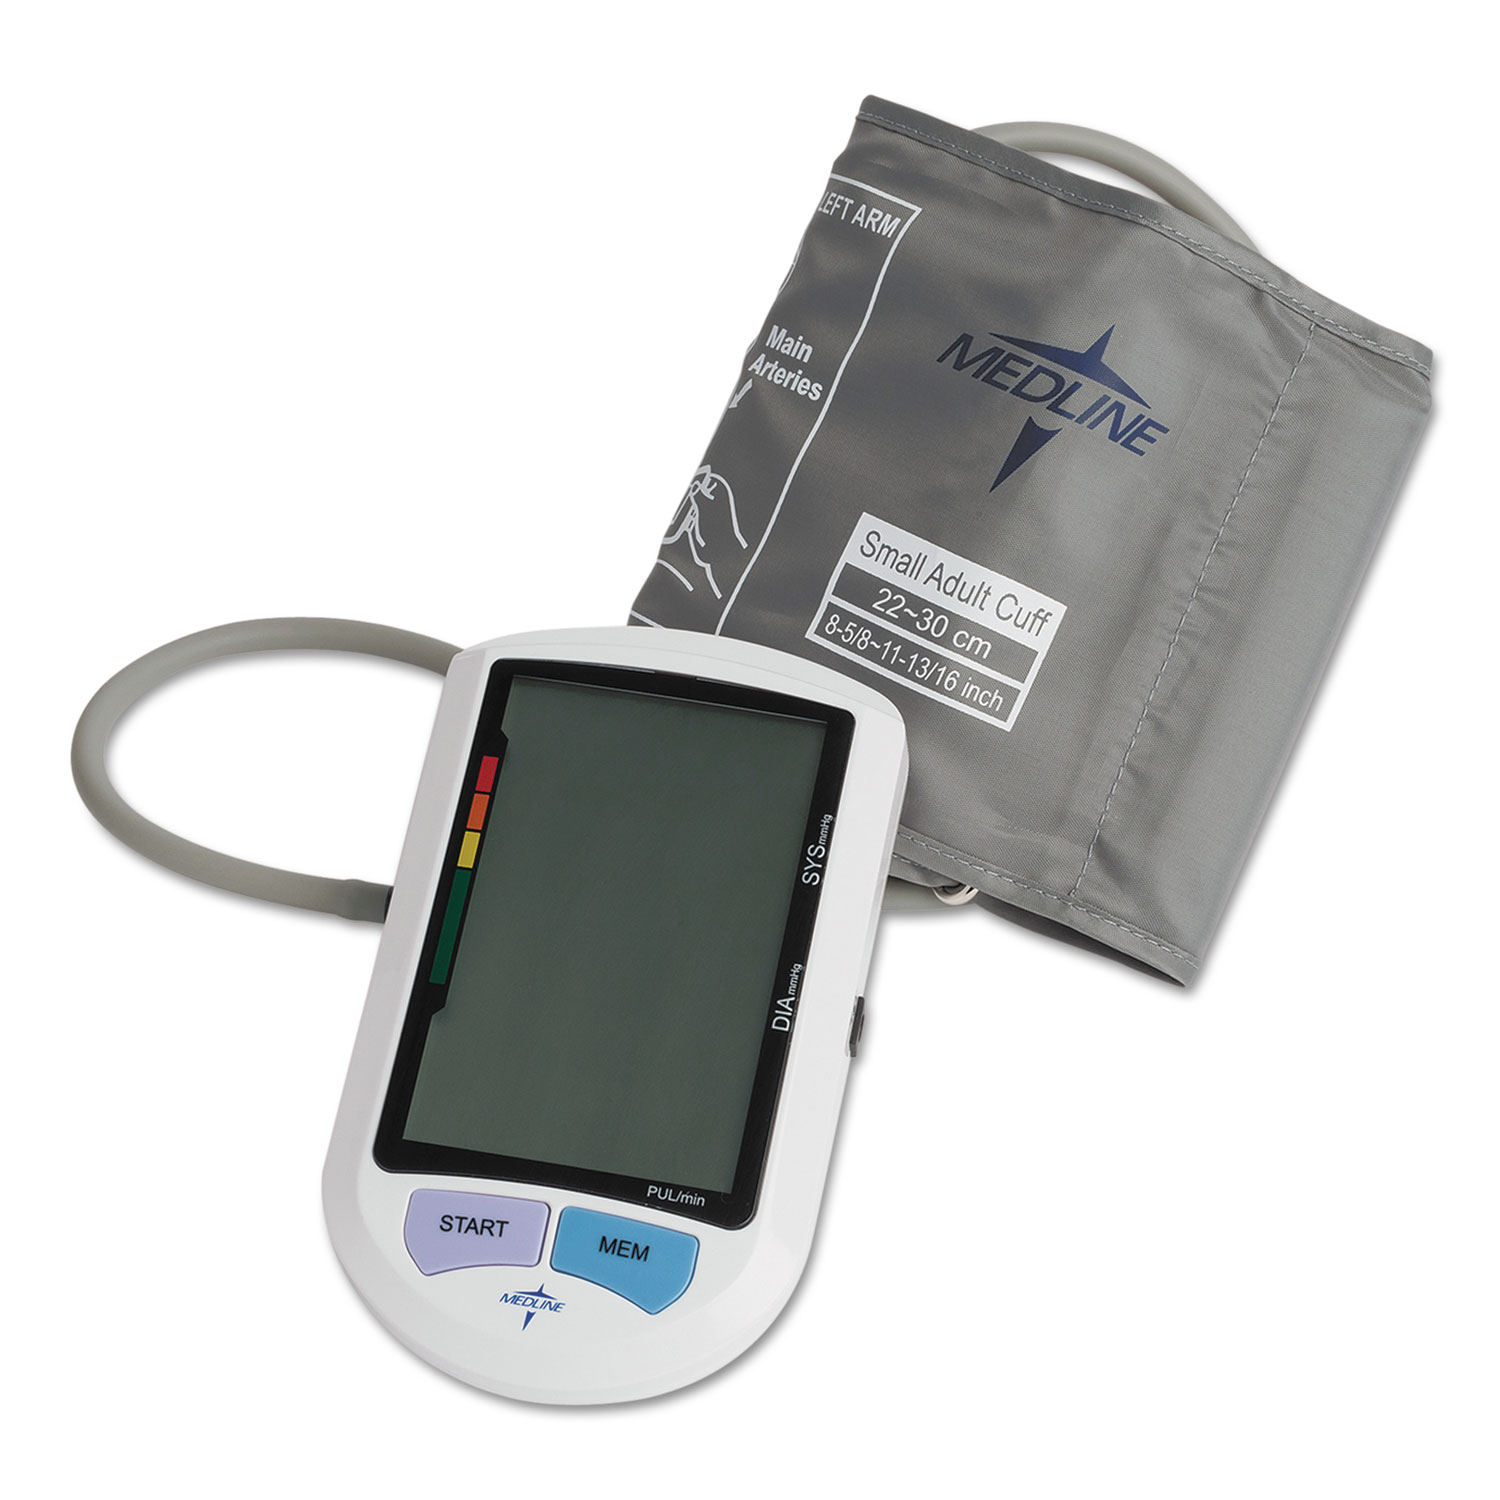 Automatic Digital Upper Arm Blood Pressure Monitor, Small Adult Size - BOSS  Office and Computer Products